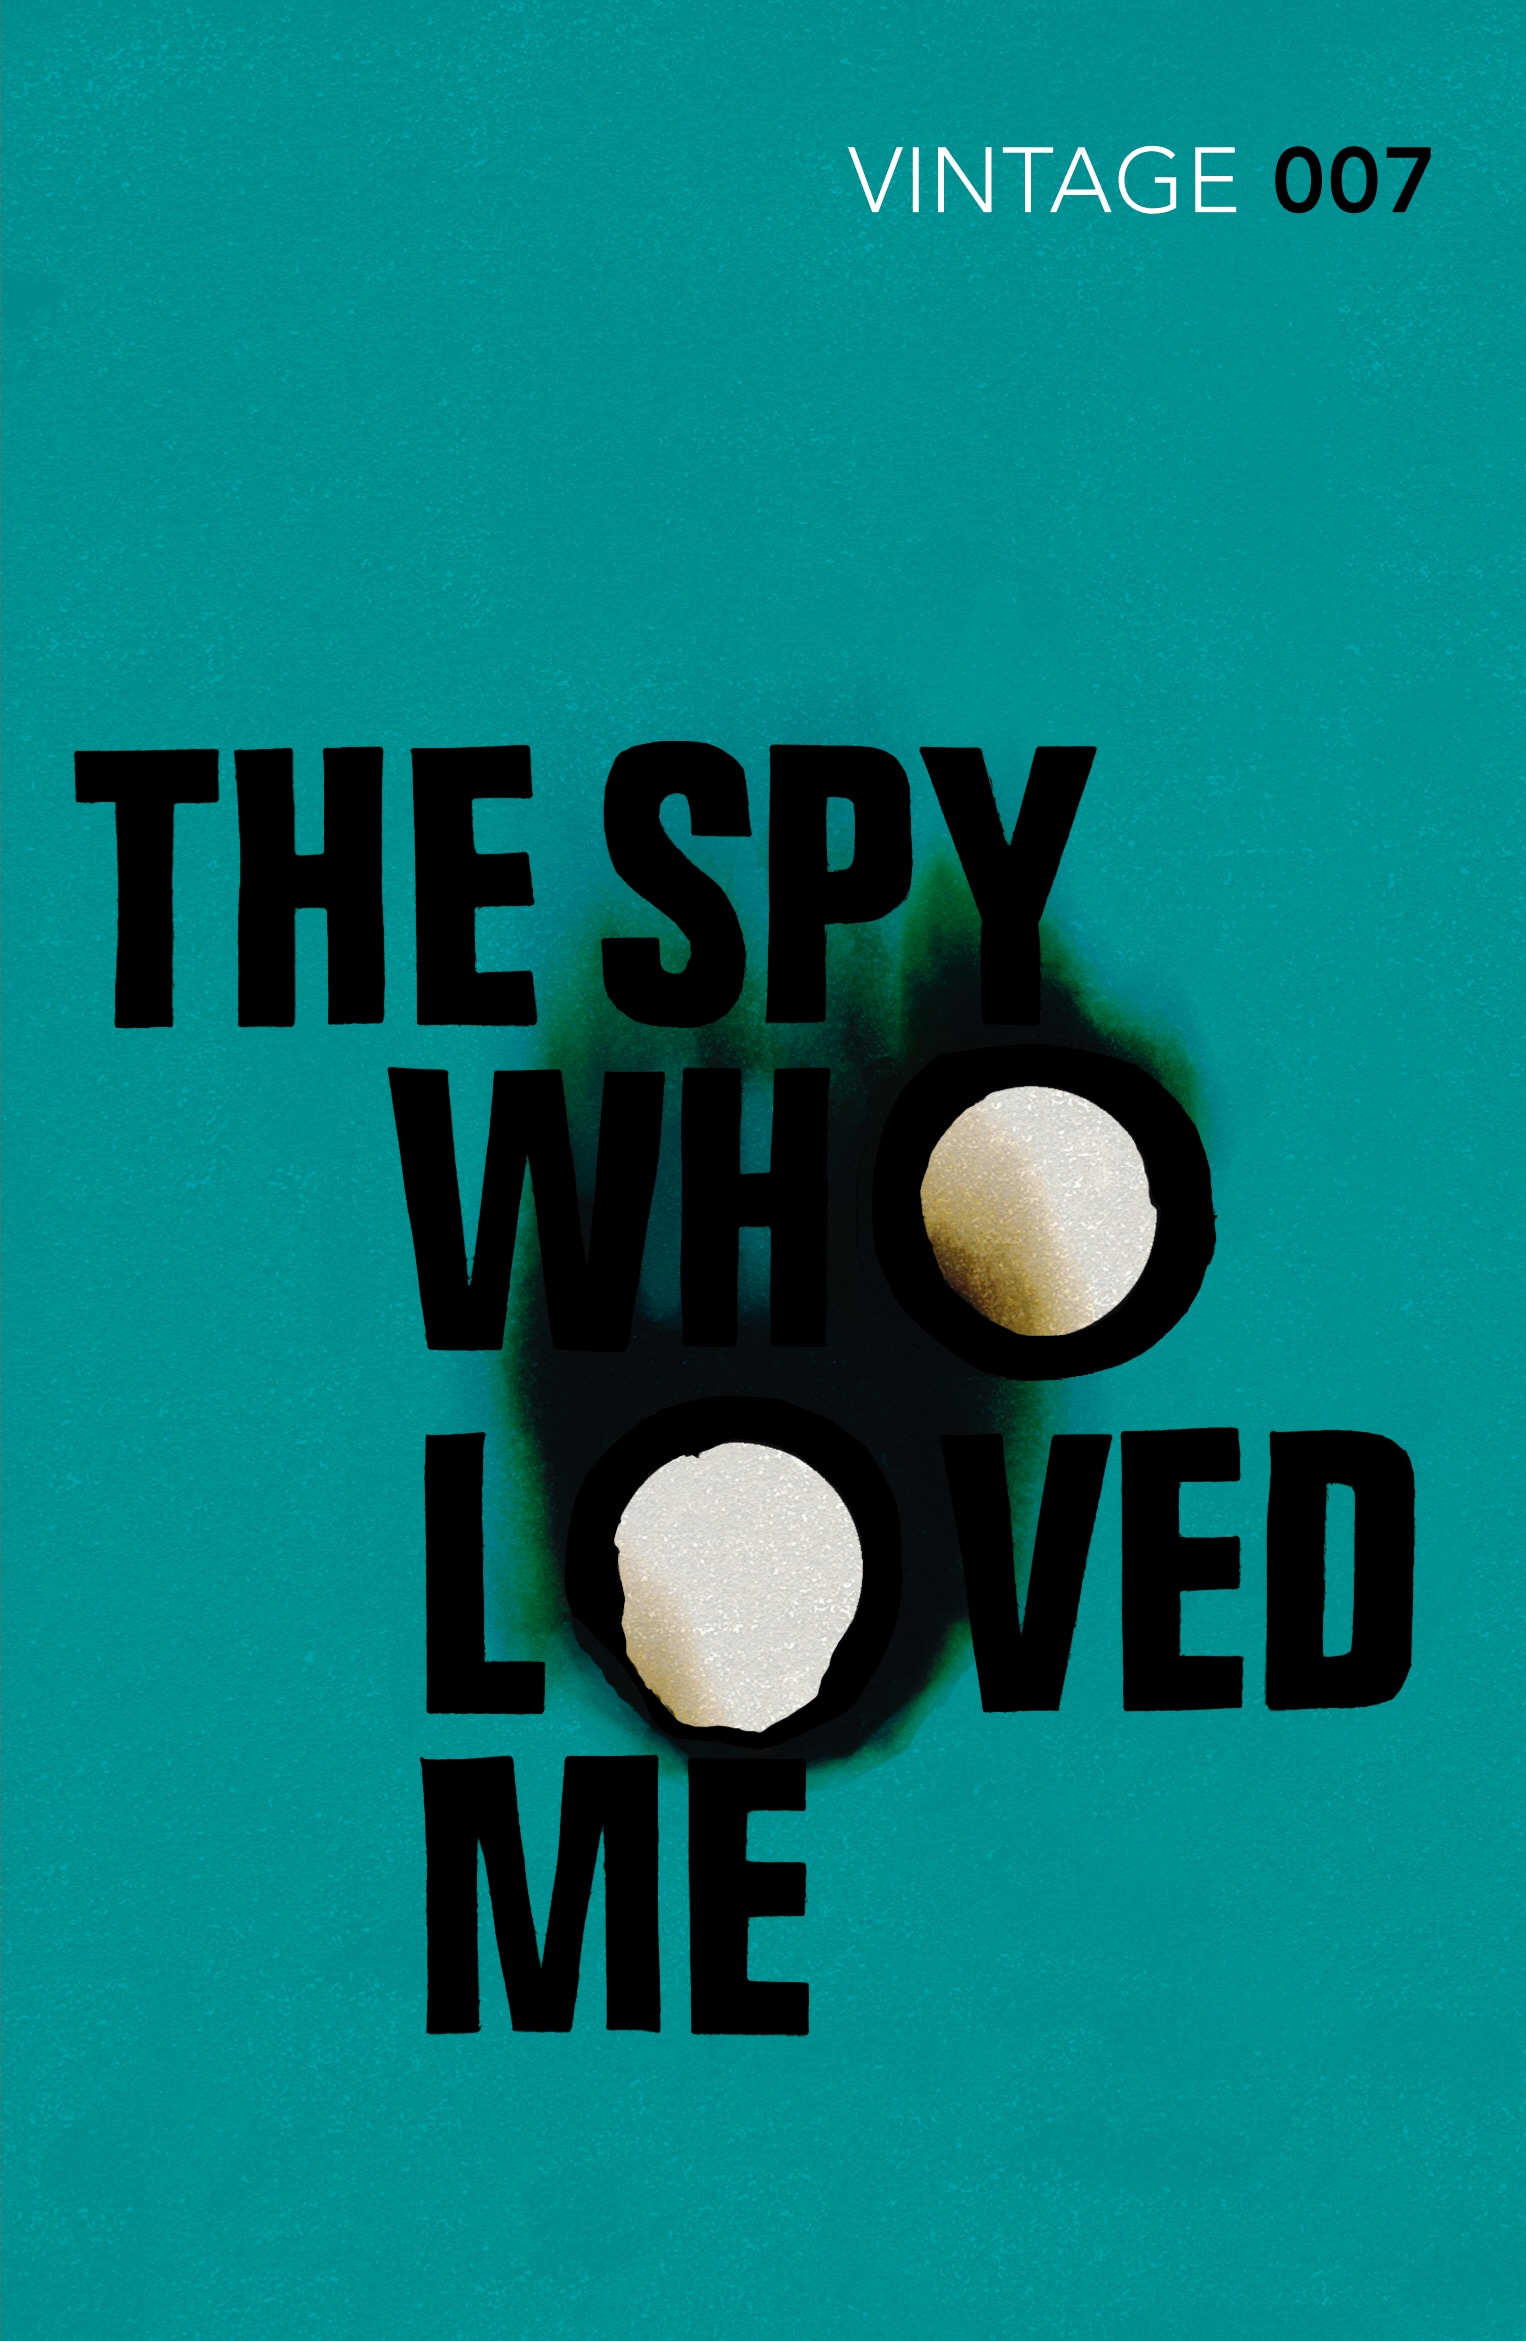 Book “The Spy Who Loved Me” by Ian Fleming, Douglas Kennedy — September 6, 2012